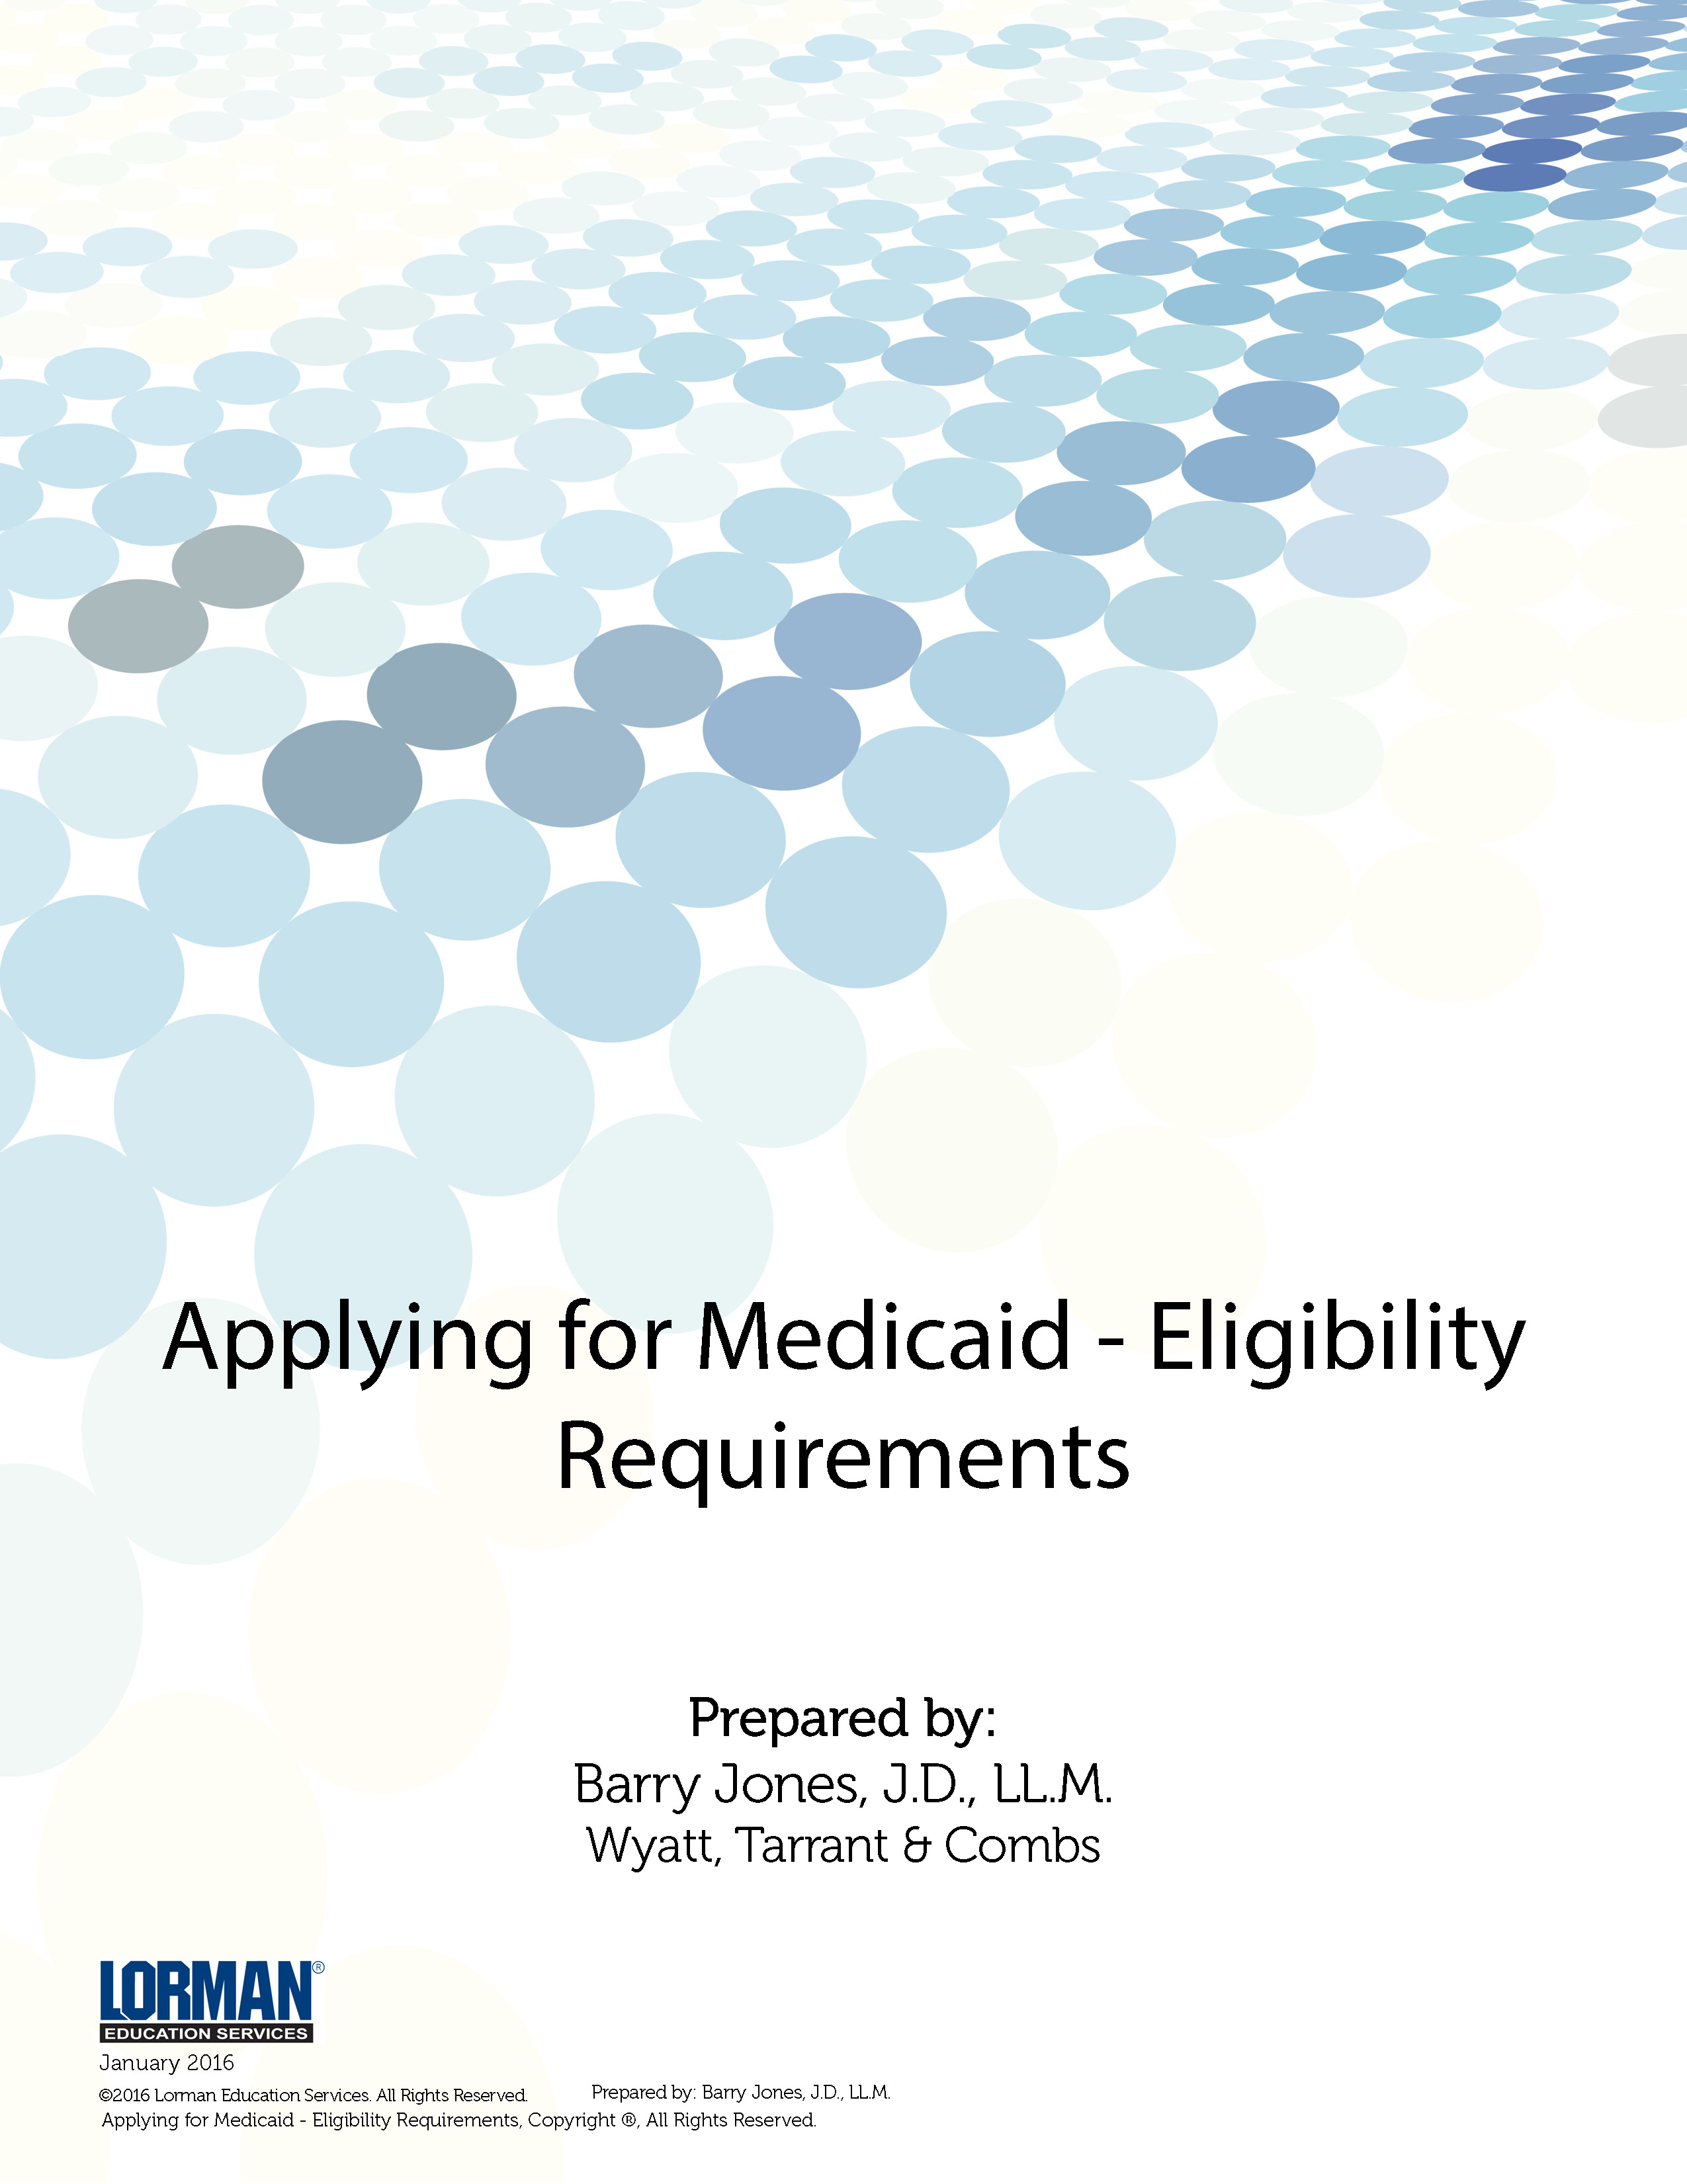 Applying for Medicaid - Eligibility Requirements